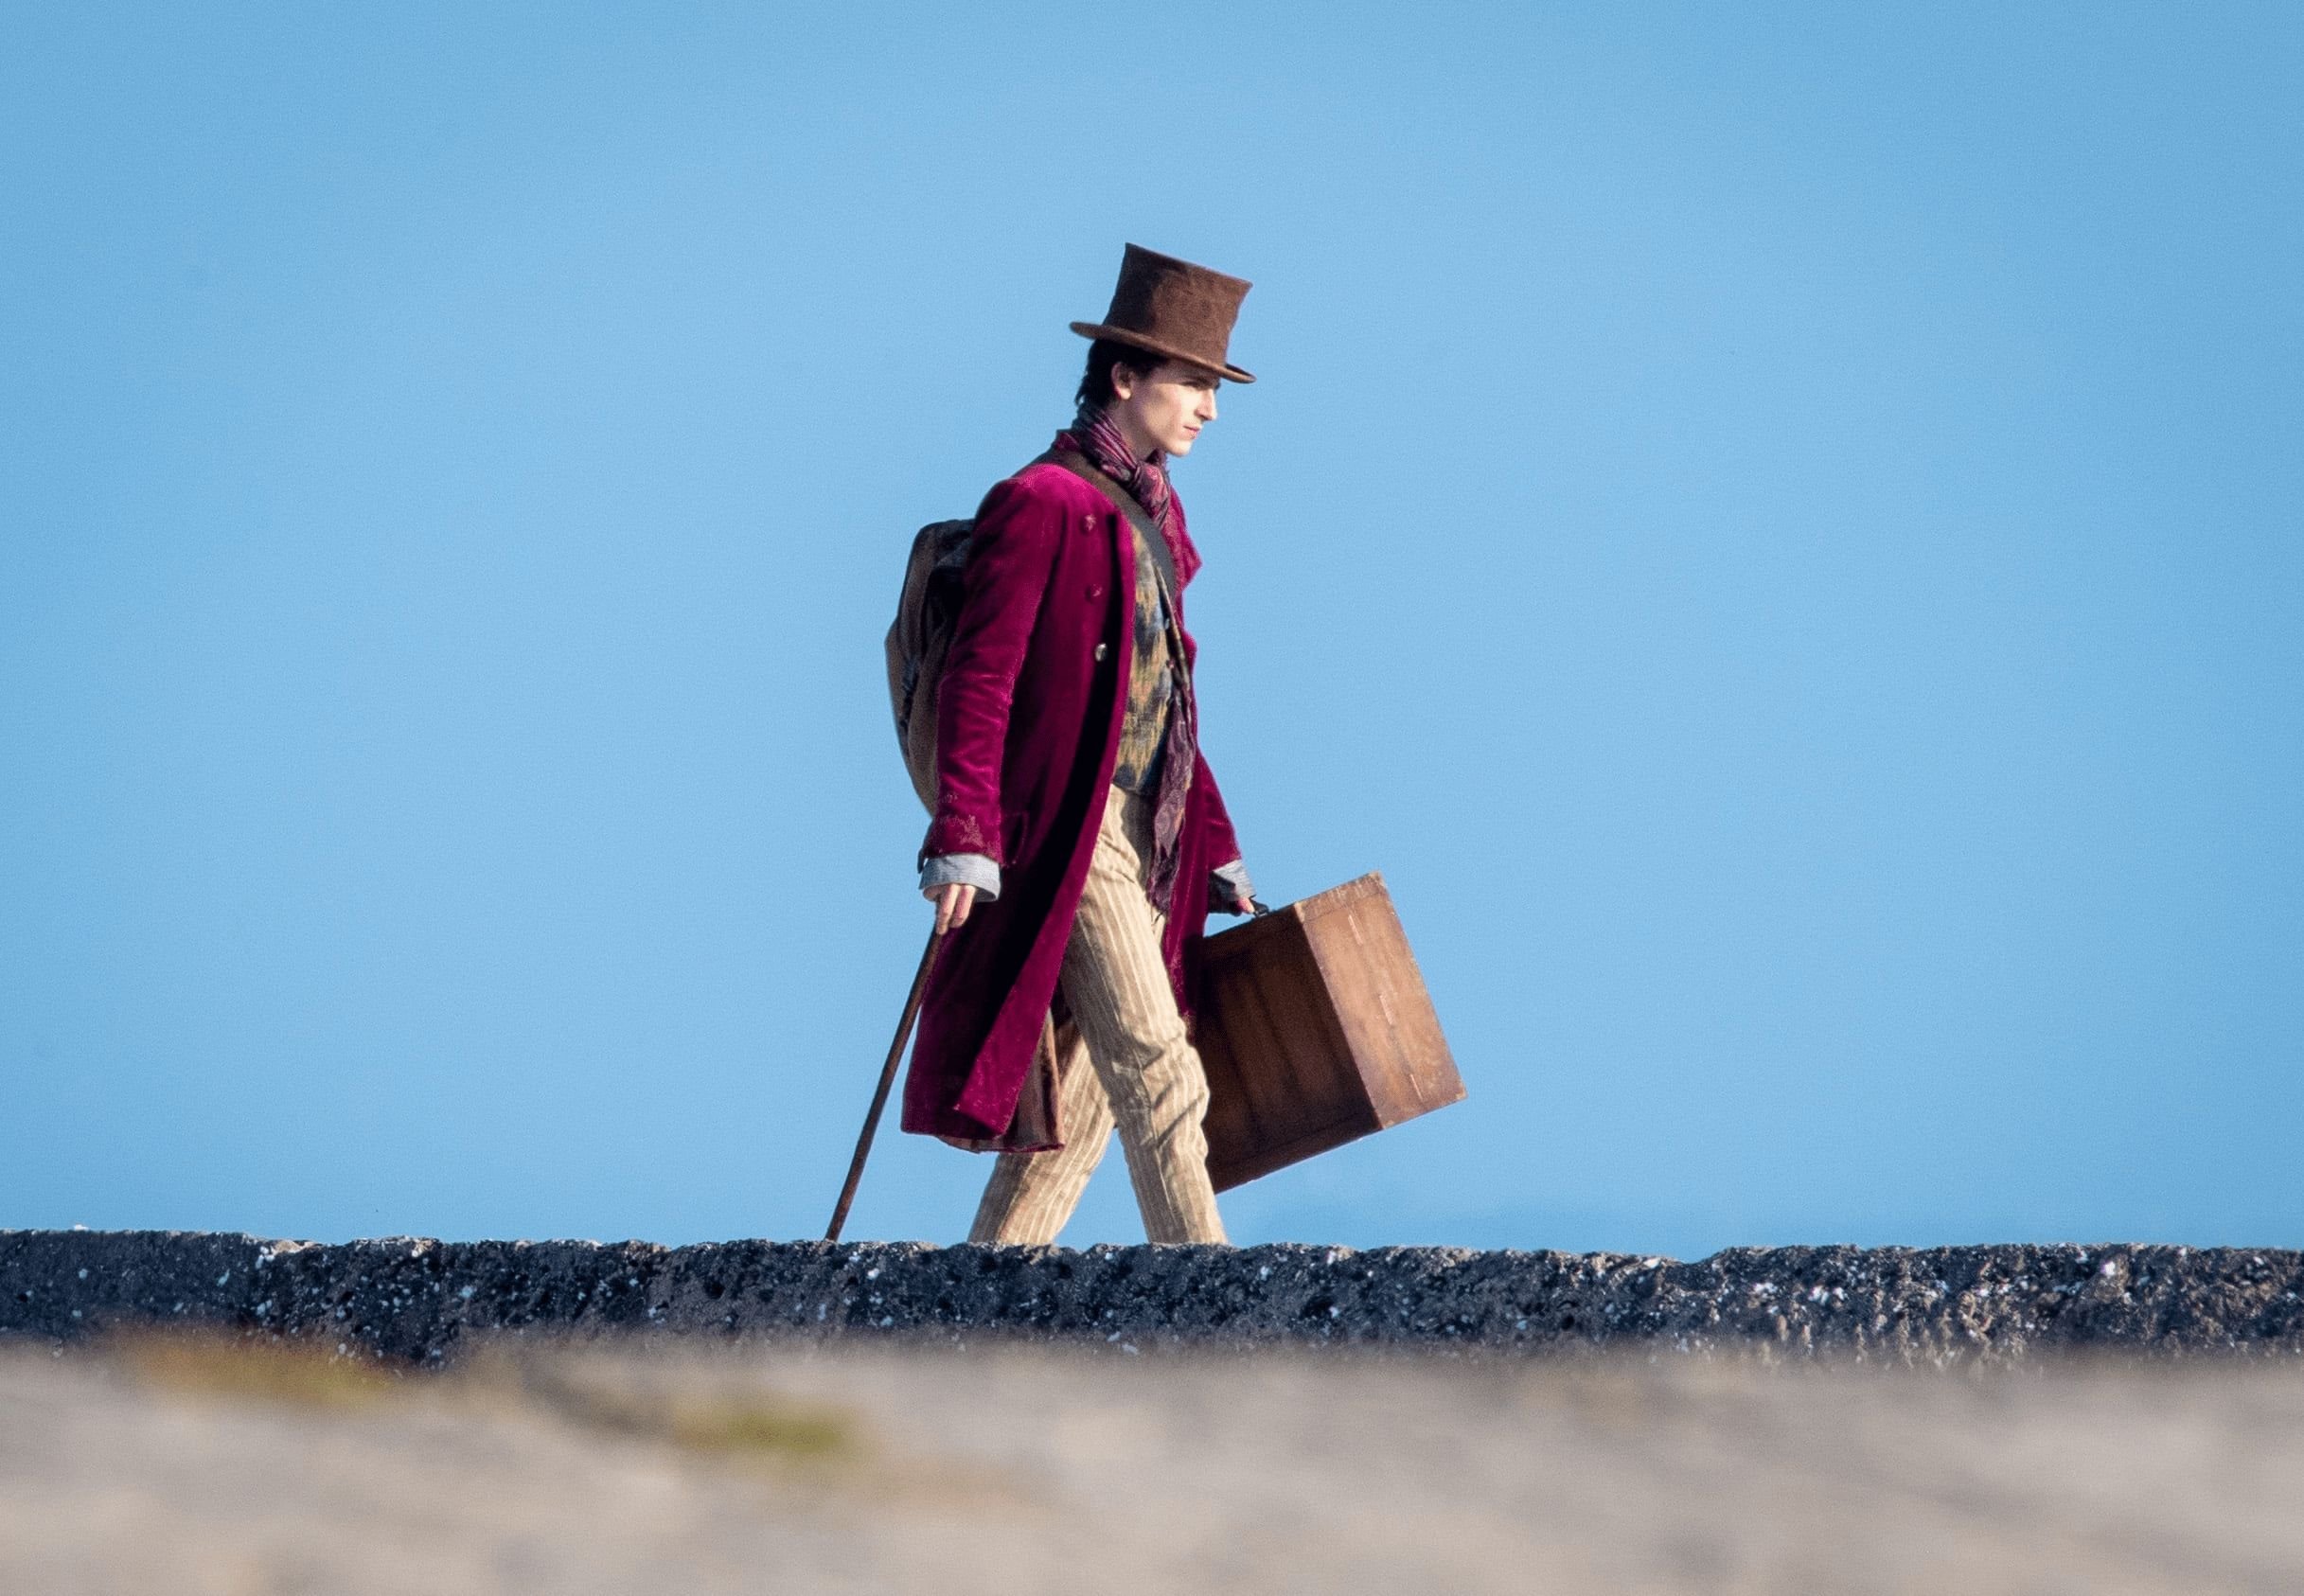 Is the Willy Wonka movie the End of an Iconic Character?